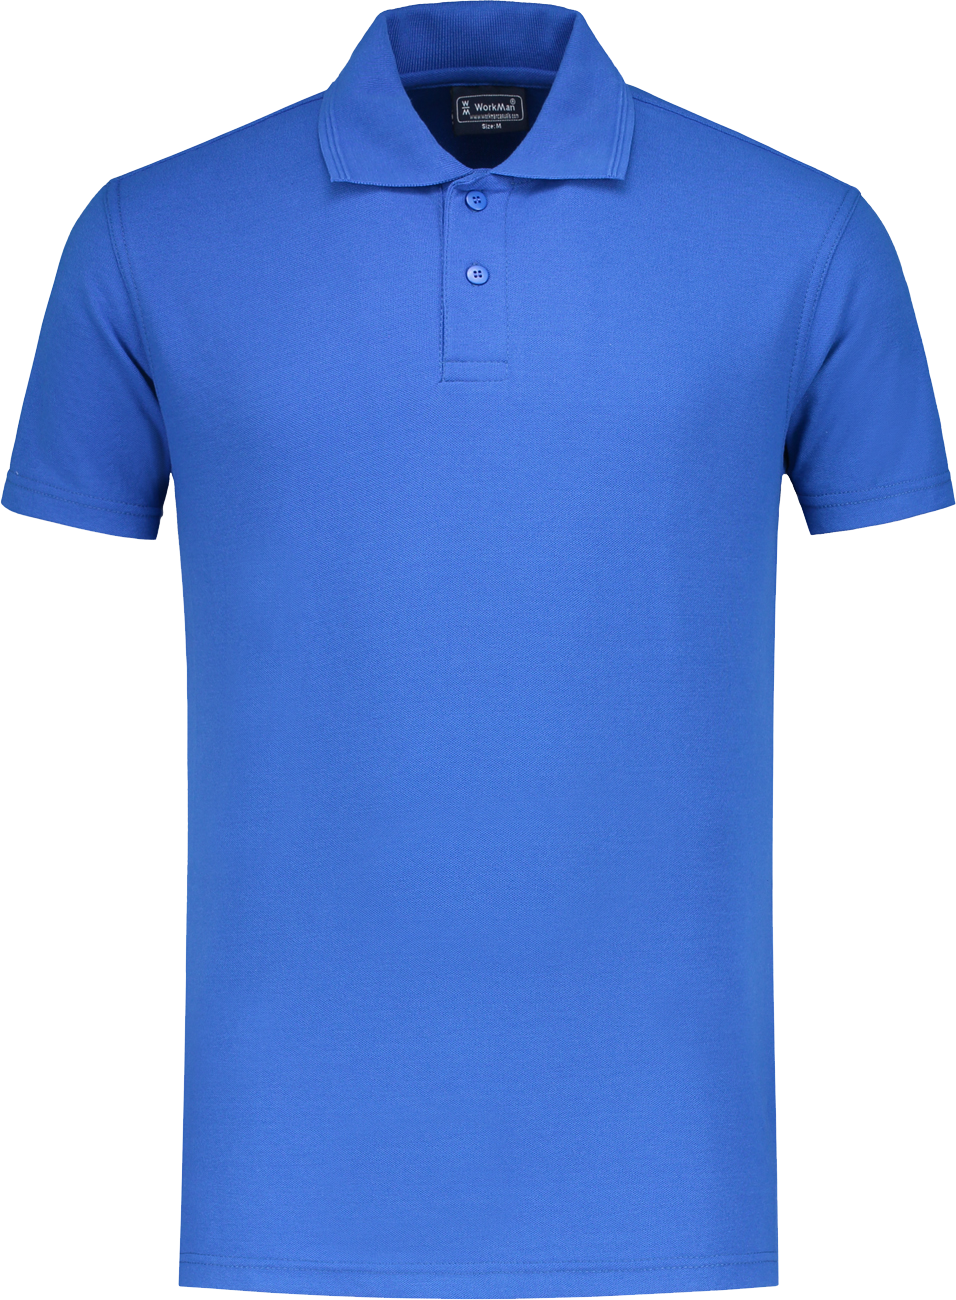 8104 Poloshirt Outfitters Royal Blue